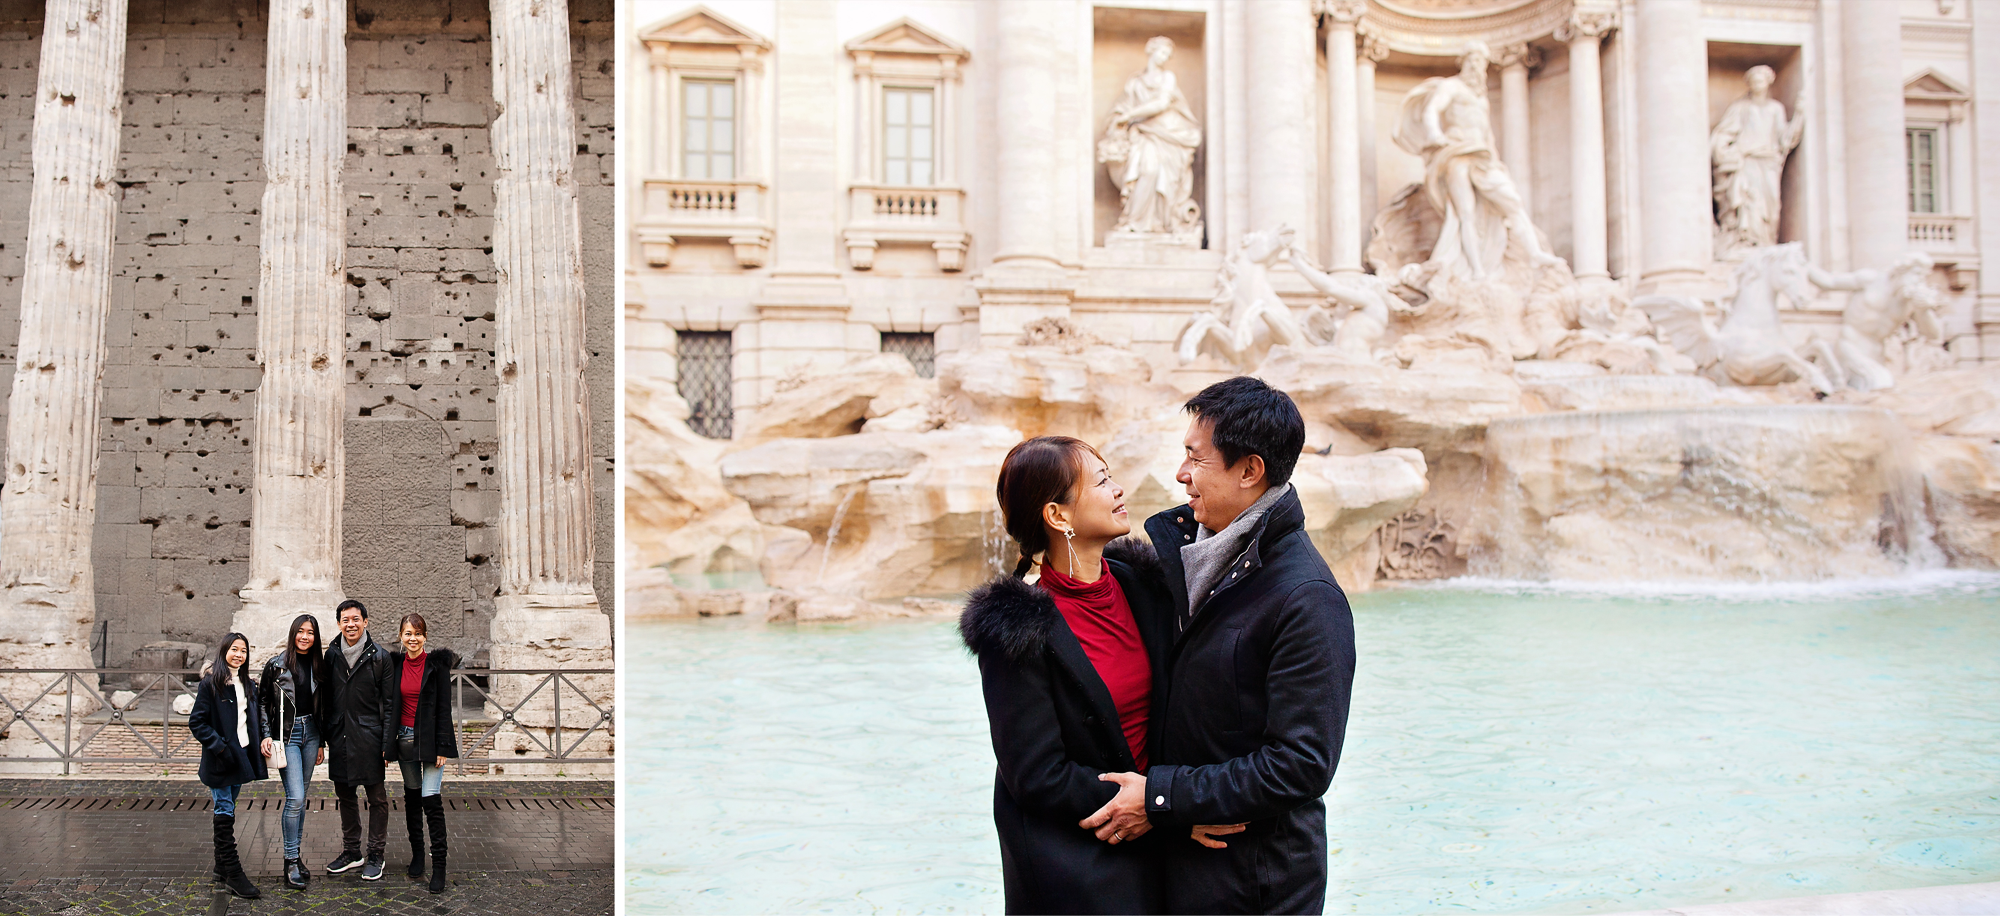 Honeymoon, vacation, family, engagement, maternity, wedding, love story individual and solo photoshoots in Rome, Italy by photographer Tricia Anne Photography | Rome Photographer, vacation, tripadvisor, instagram, fun, married, bride, groom, love, story, photography, session, photoshoot, wedding photographer, mywed, vacation photographer, engagement photo, honeymoon photoshoot, rome honeymoon, rome wedding, elopement in Rome, honeymoon photographer rome, Family Photo shoot Rome, Rome Family Photography, Rome Family Photographer, Vatican Photo shoot, Vatican Photography, Colosseum photo shoot, Rome doors, Rome Family Photoshoot, Trevi Fountain, Trevi Fountain photo shoot, Trevi Fountain photoshoot, photoshoot at the Trevi Fountain, photo shoot at the Trevi Fountain